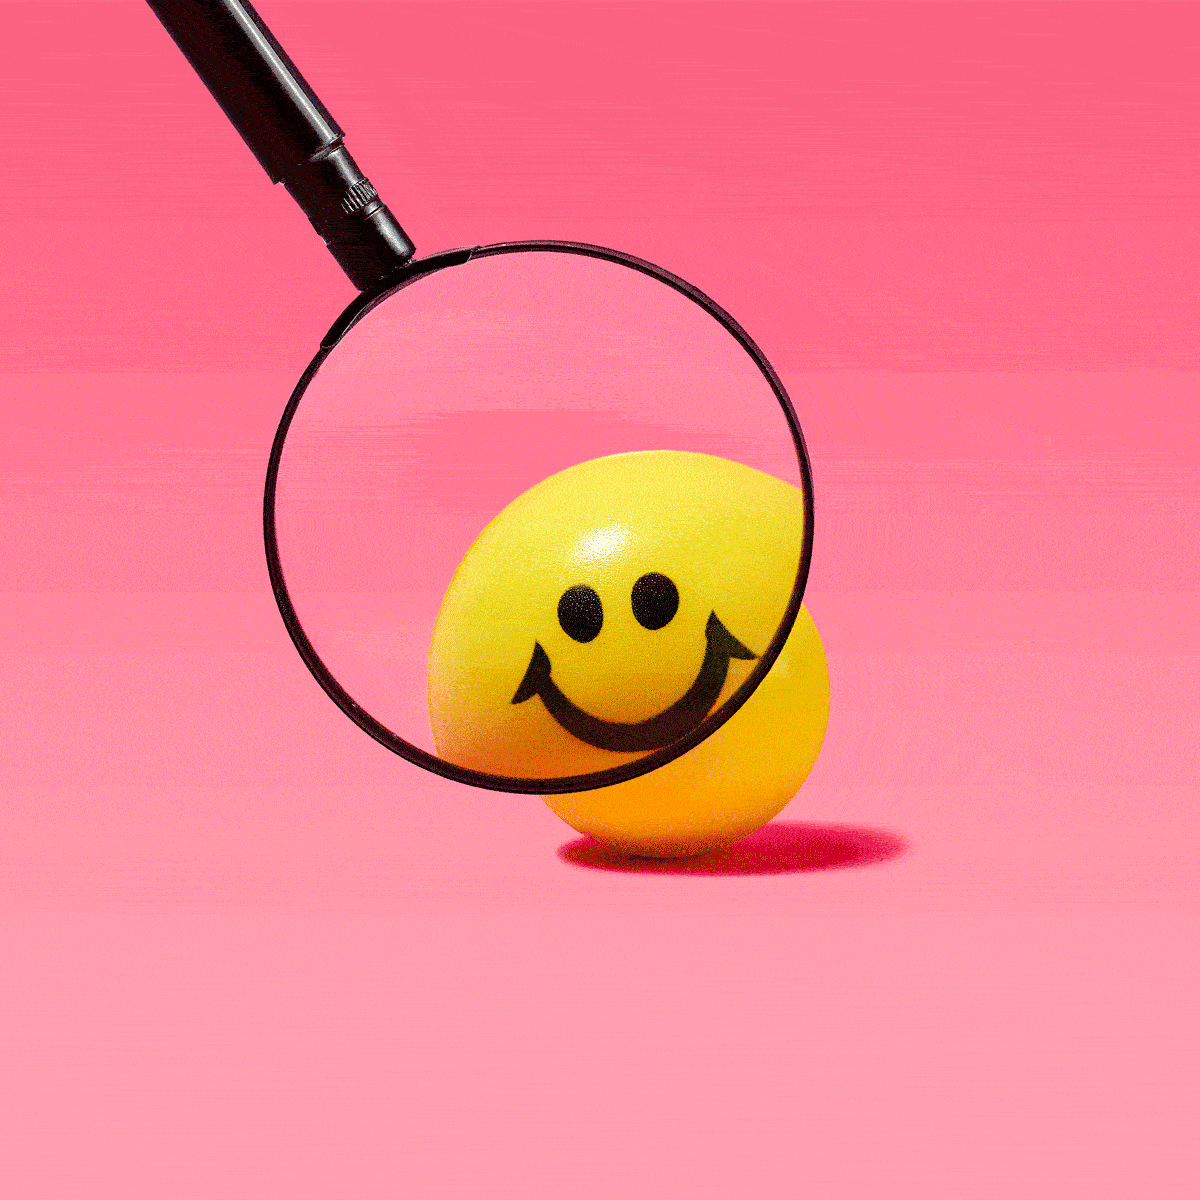 Magnifying glass magnifying different angles of a yellow smiley face ball to investigate what is happiness; pink background